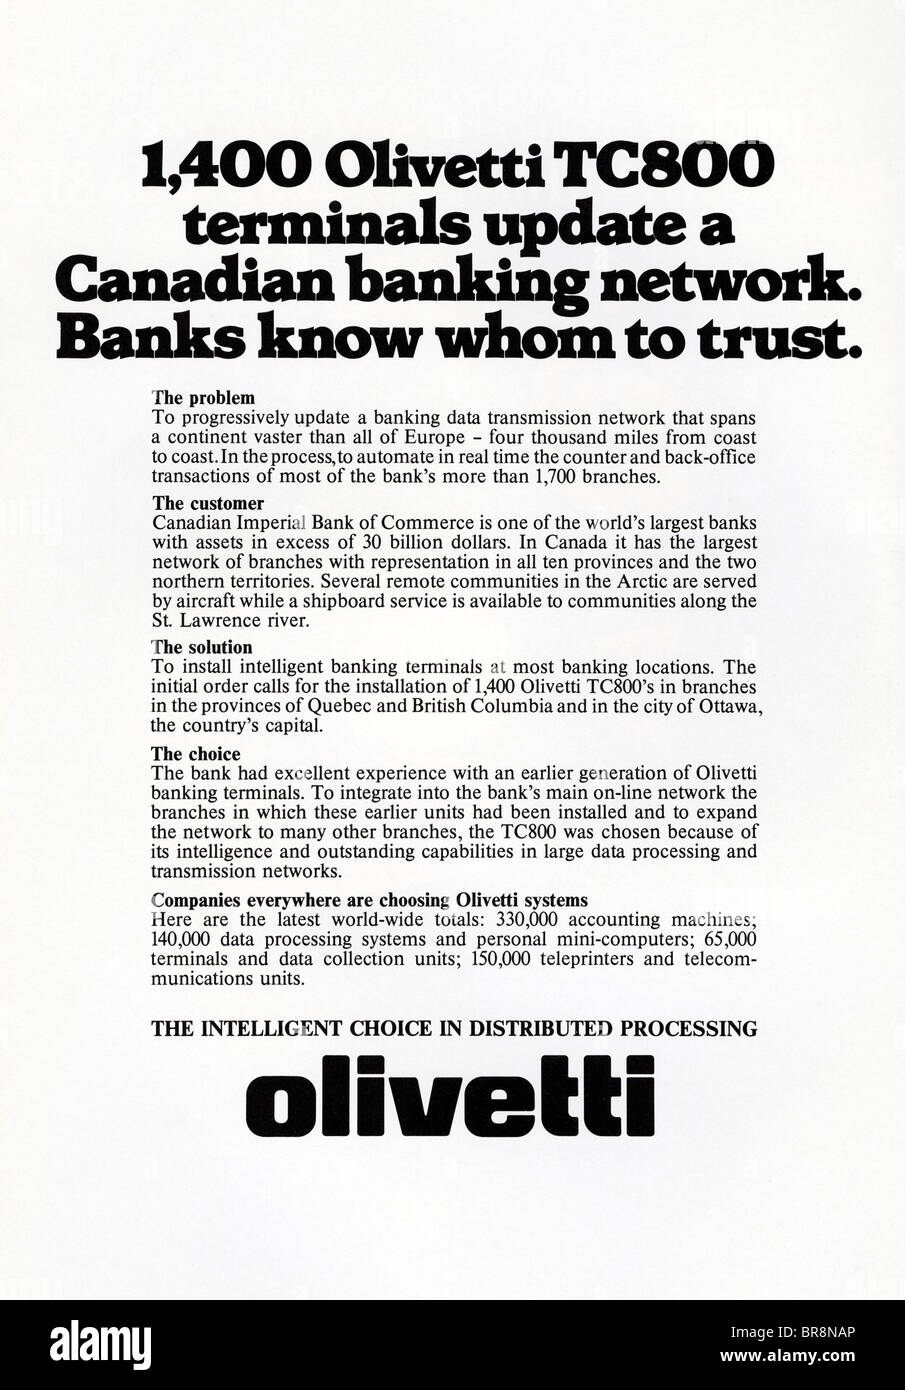 Black and white text advert for Olivetti Canadian banking network circa 1978 in American magazine Stock Photo